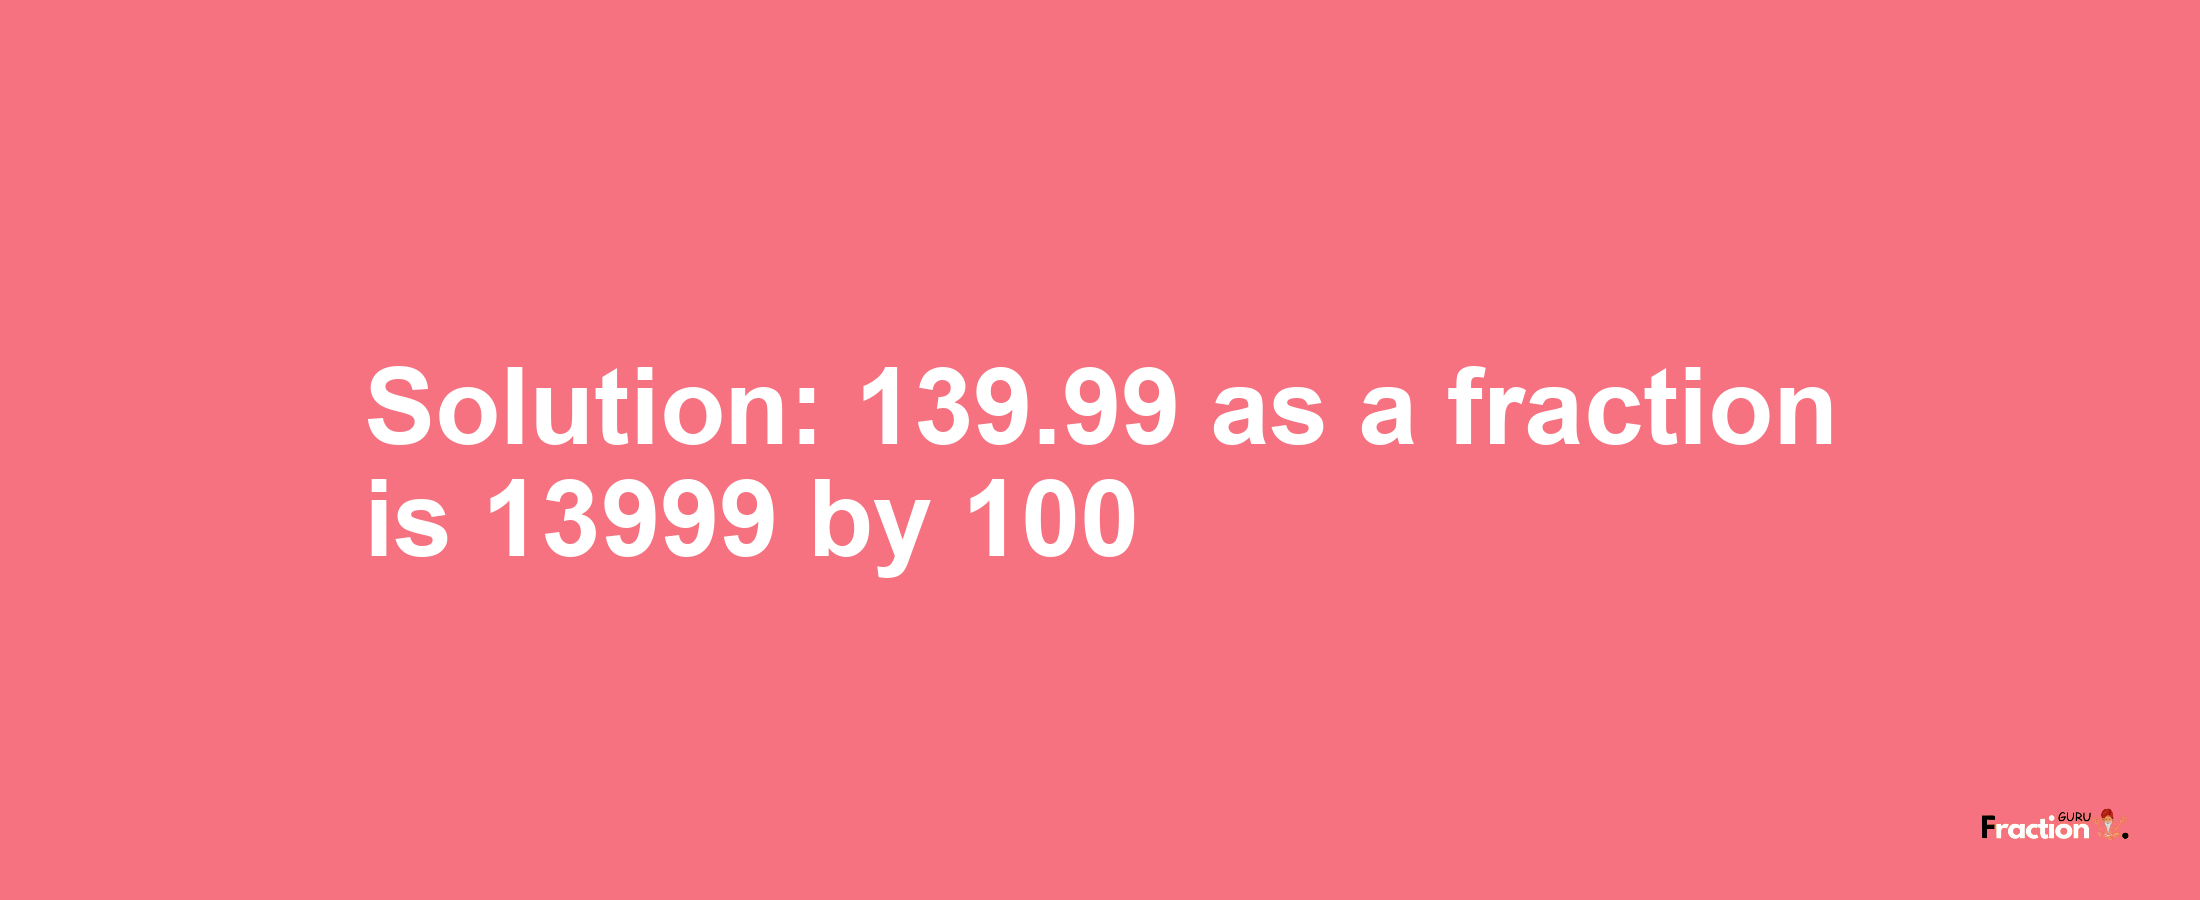 Solution:139.99 as a fraction is 13999/100